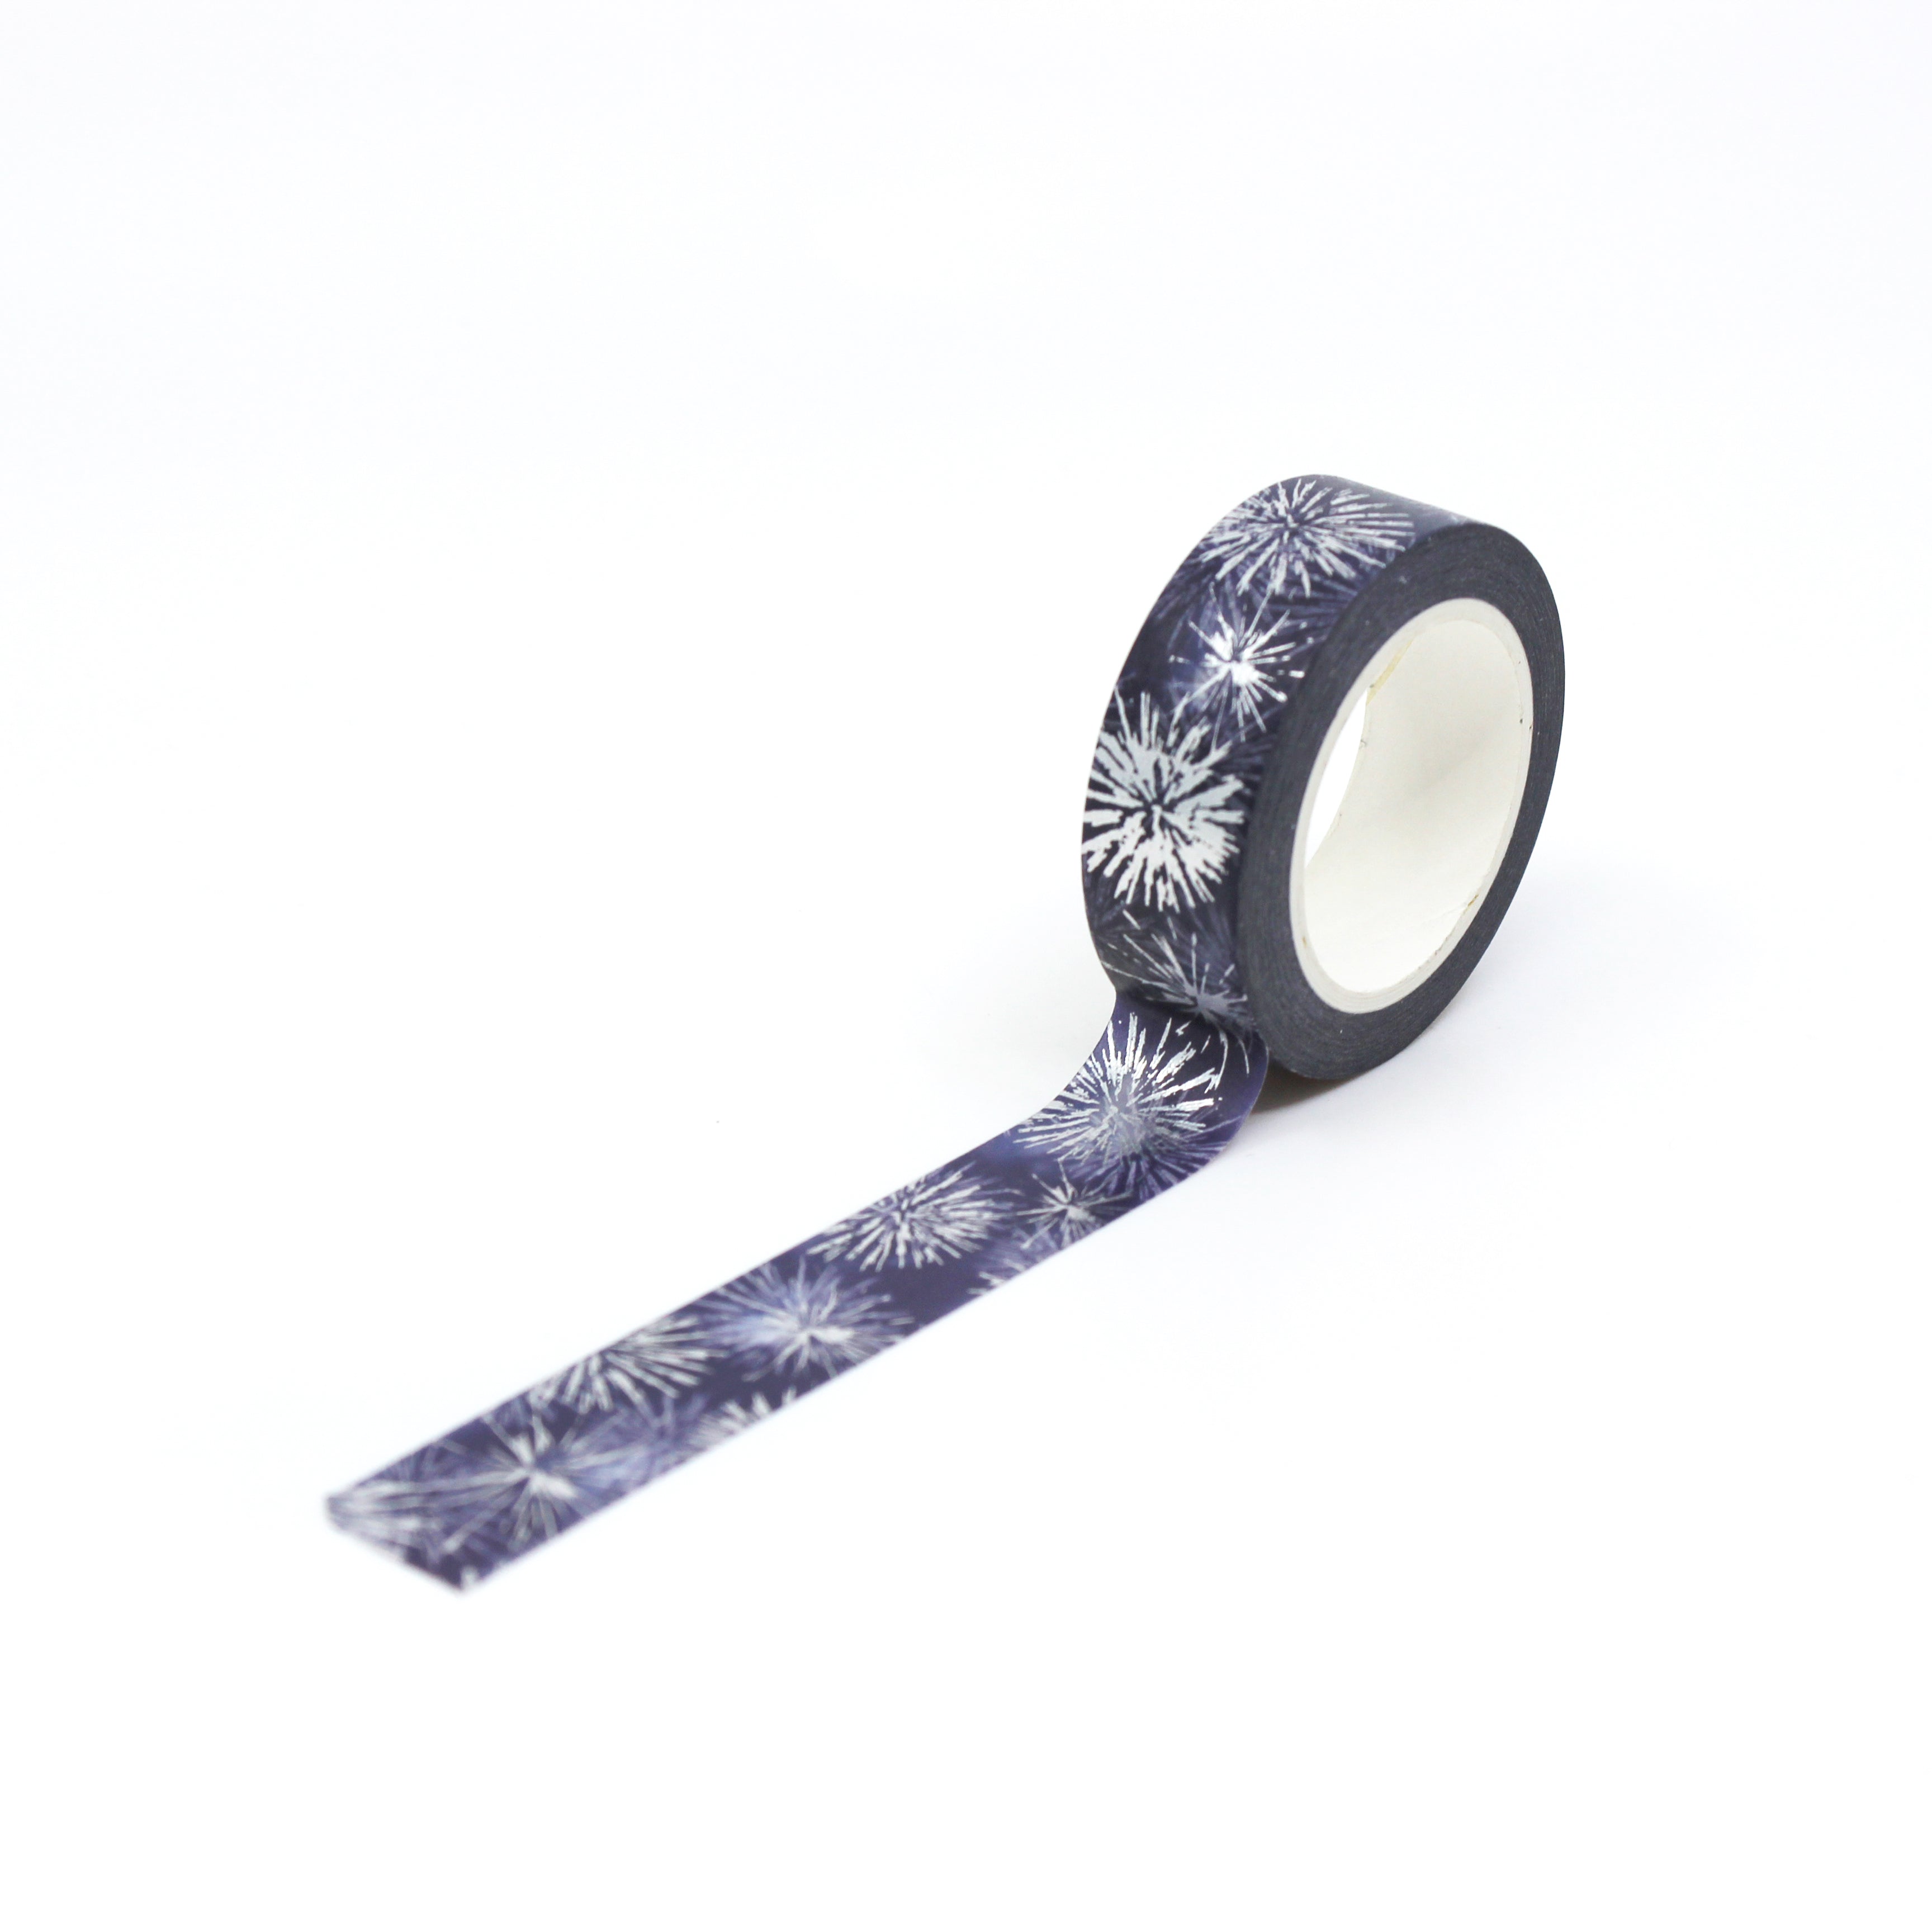 Celebrate in style with our dazzling silver foil and blue fireworks washi tape, perfect for Fourth of July or New Year's crafts. This tape is sold at BBB Supplies Craft Shop.